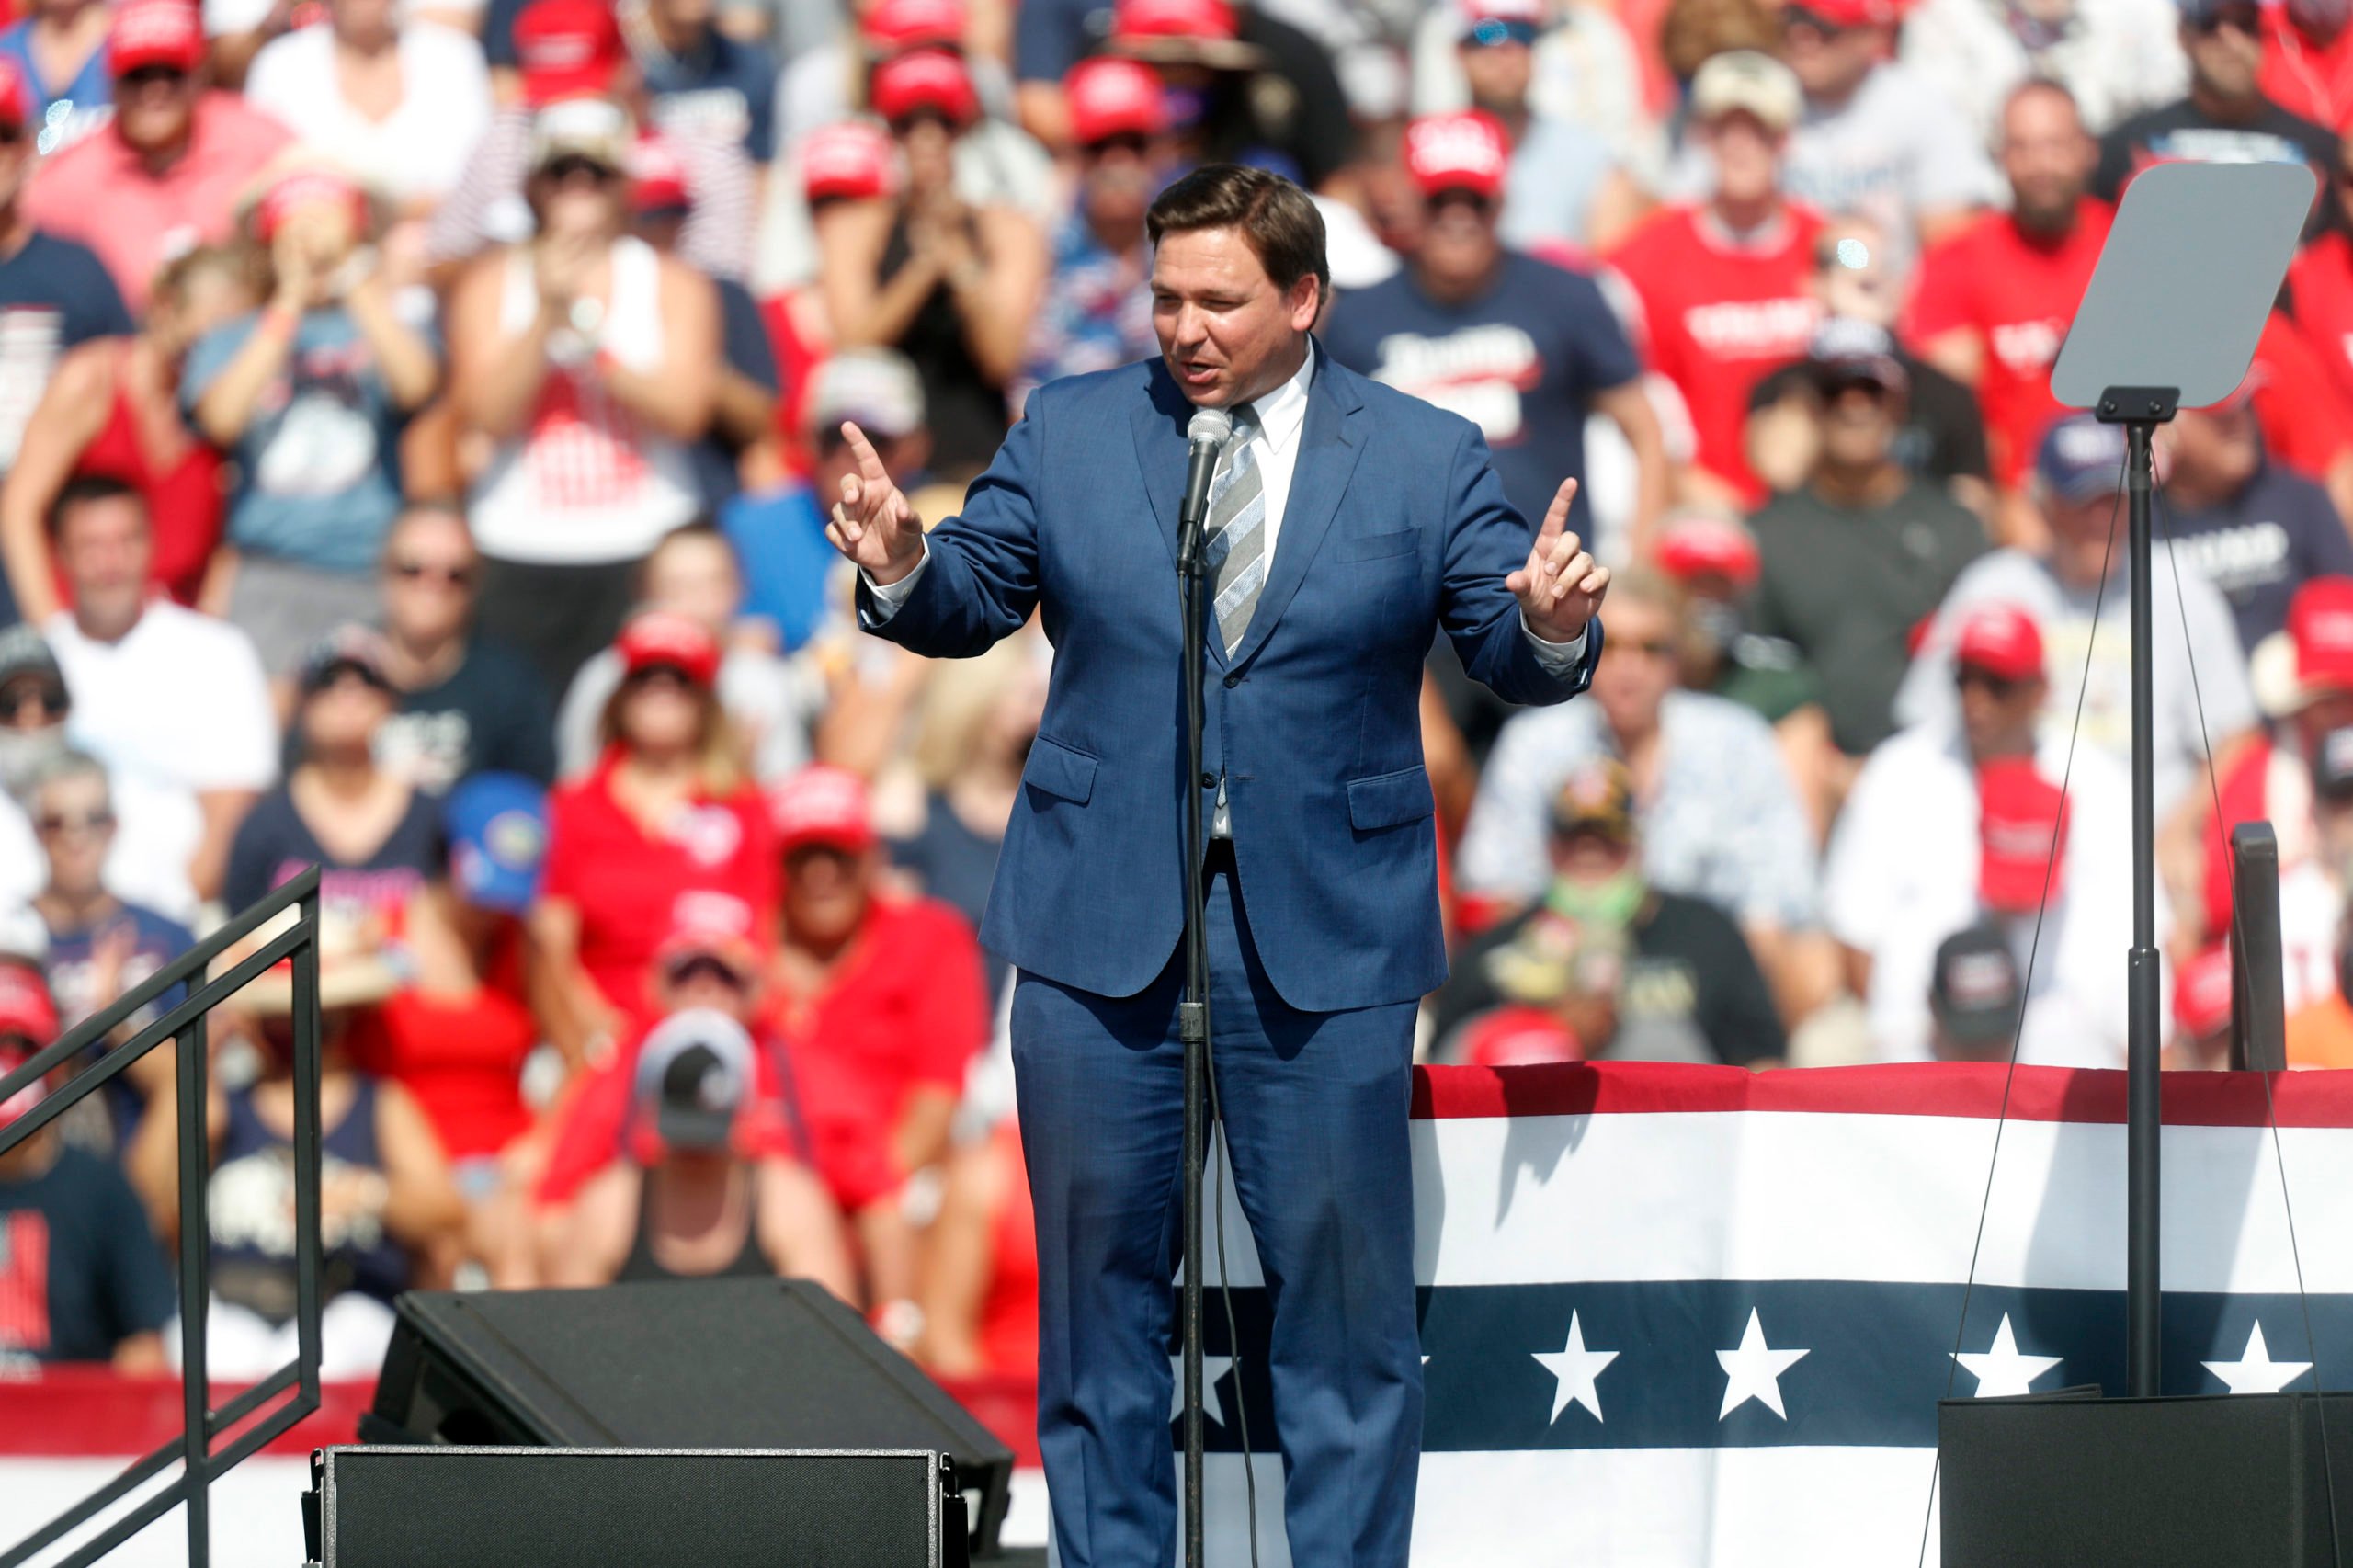 TAMPA, FL - OCTOBER 29: Florida Governor Ron DeSantis speaks to supporters of President Donald Trump before he arrives to give a campaign speech just four days before Election Day outside of Raymond James Stadium on October 29, 2020 in Tampa, Florida. (Photo by Octavio Jones/Getty Images)